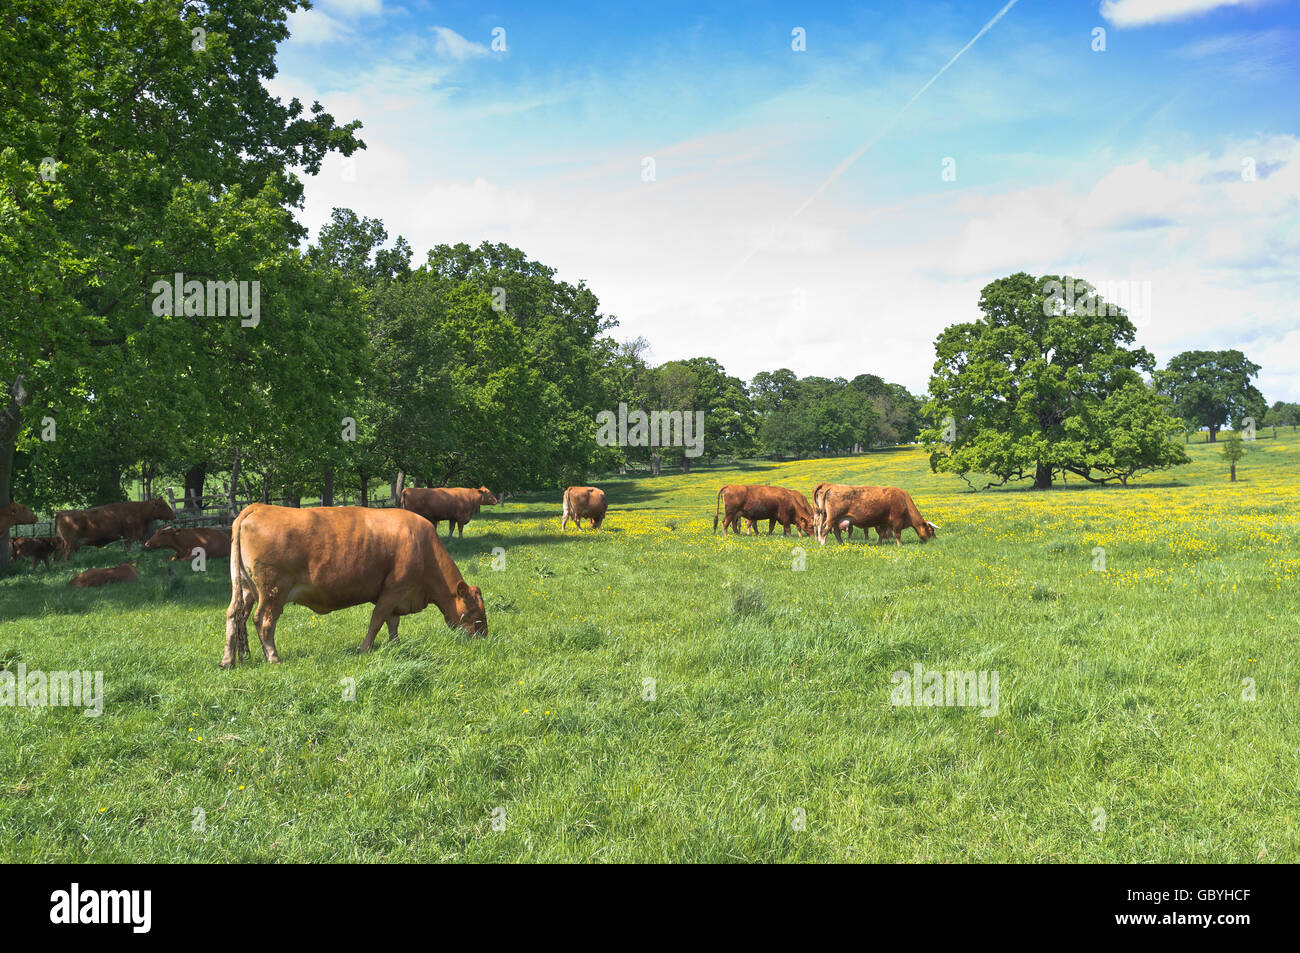 dh Beef cattle grazing COTSWOLDS GLOUCESTERSHIRE Cows in buttercup field a fields uk grass england herd landscape Stock Photo